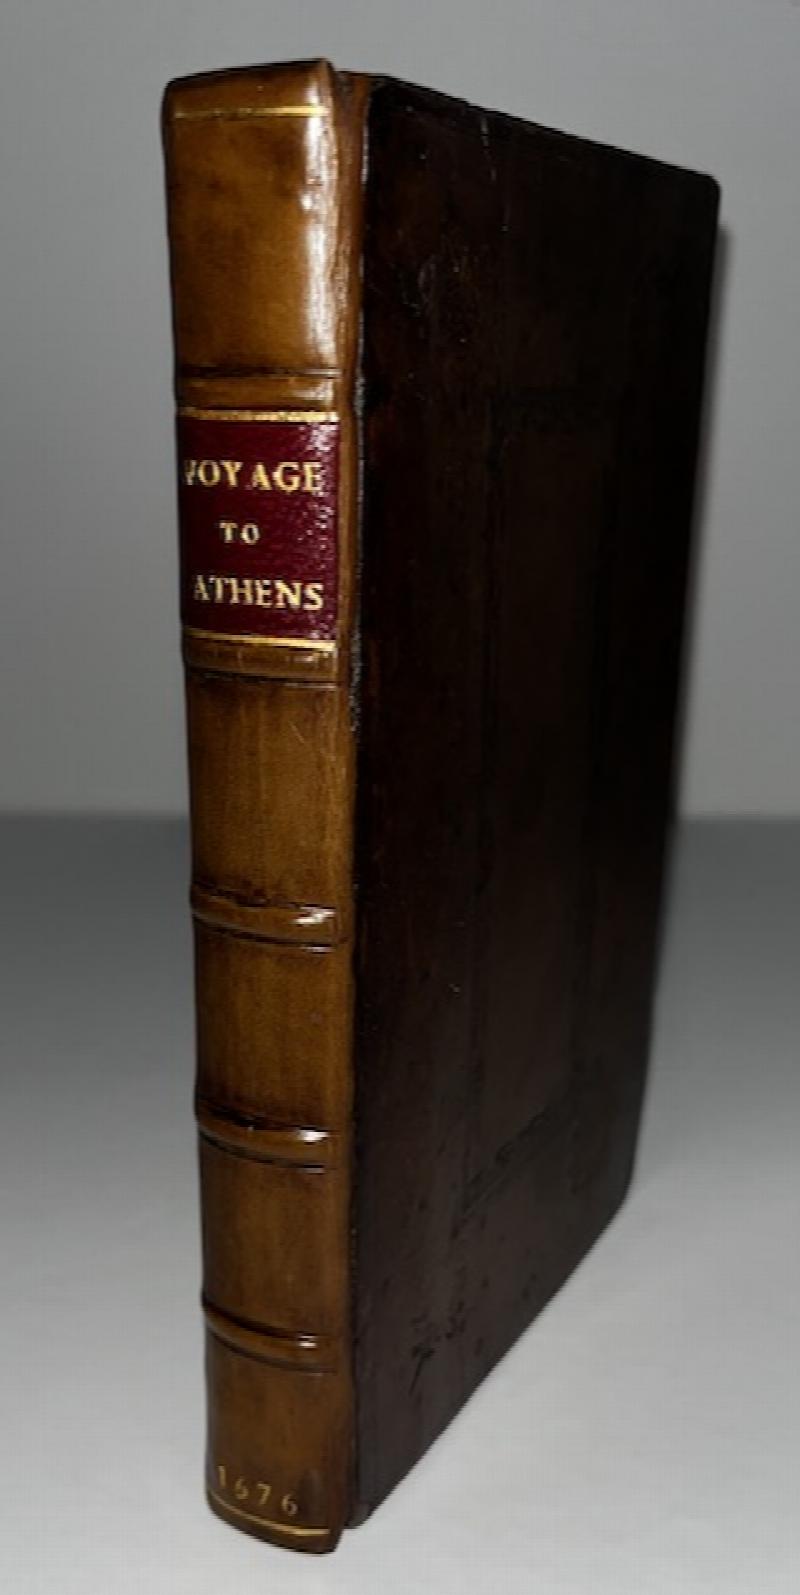 Image for An Account Of A Late Voyage To Athens, Containing The Estate both Ancient and Modern of that Famous City, and of the present Empire of the Turks, etc.